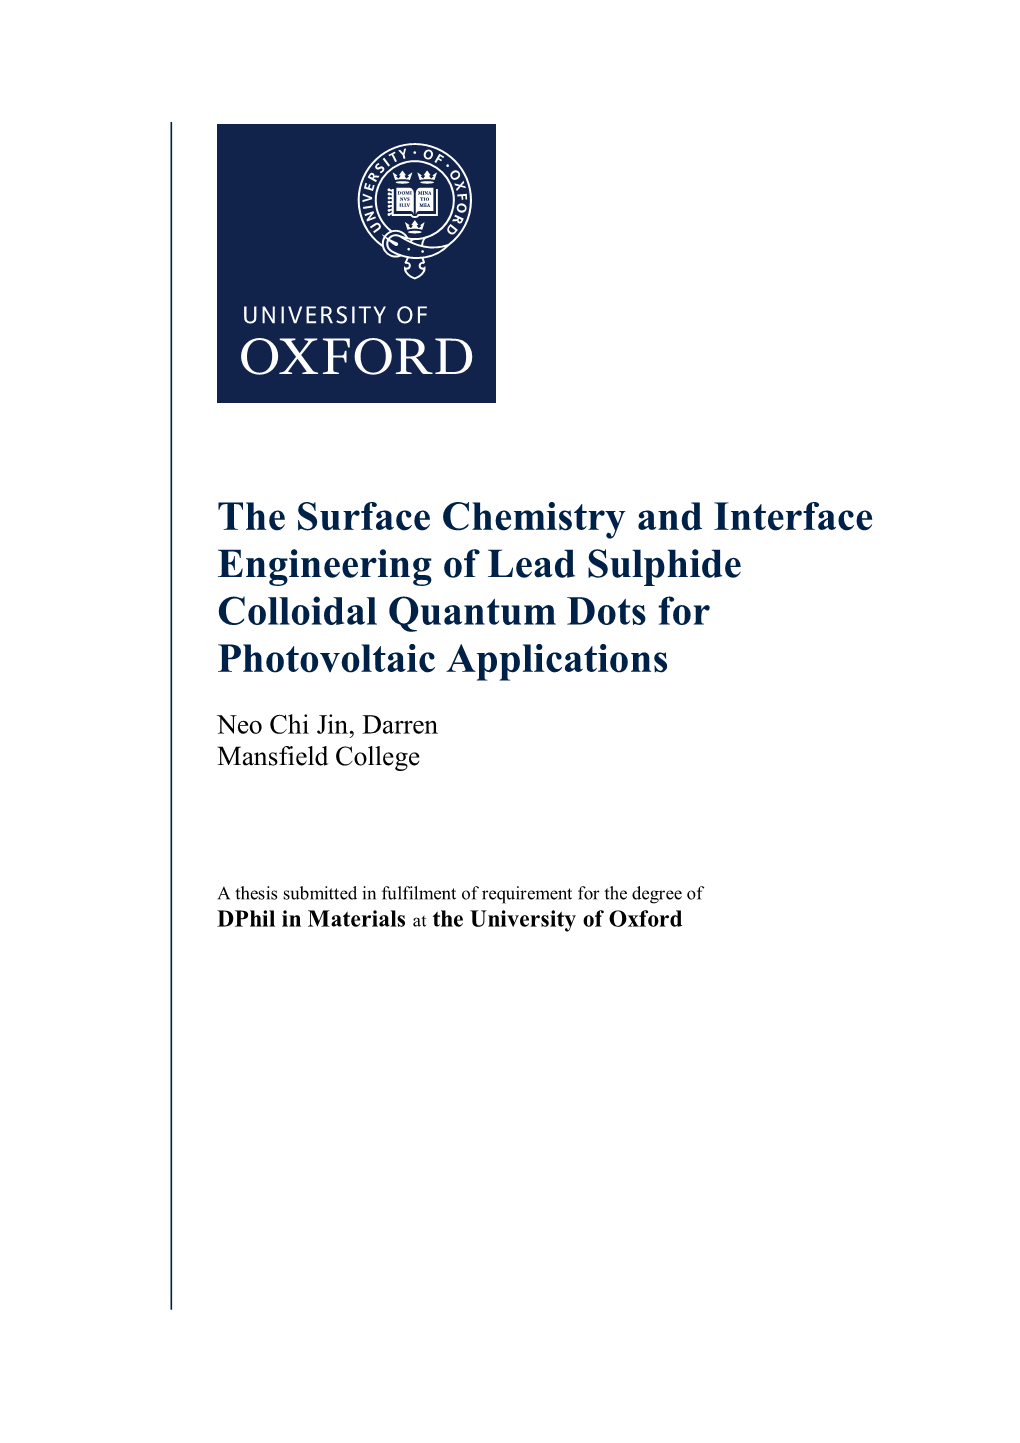 Thesis Submitted in Fulfilment of Requirement for the Degree of Dphil in Materials at the University of Oxford